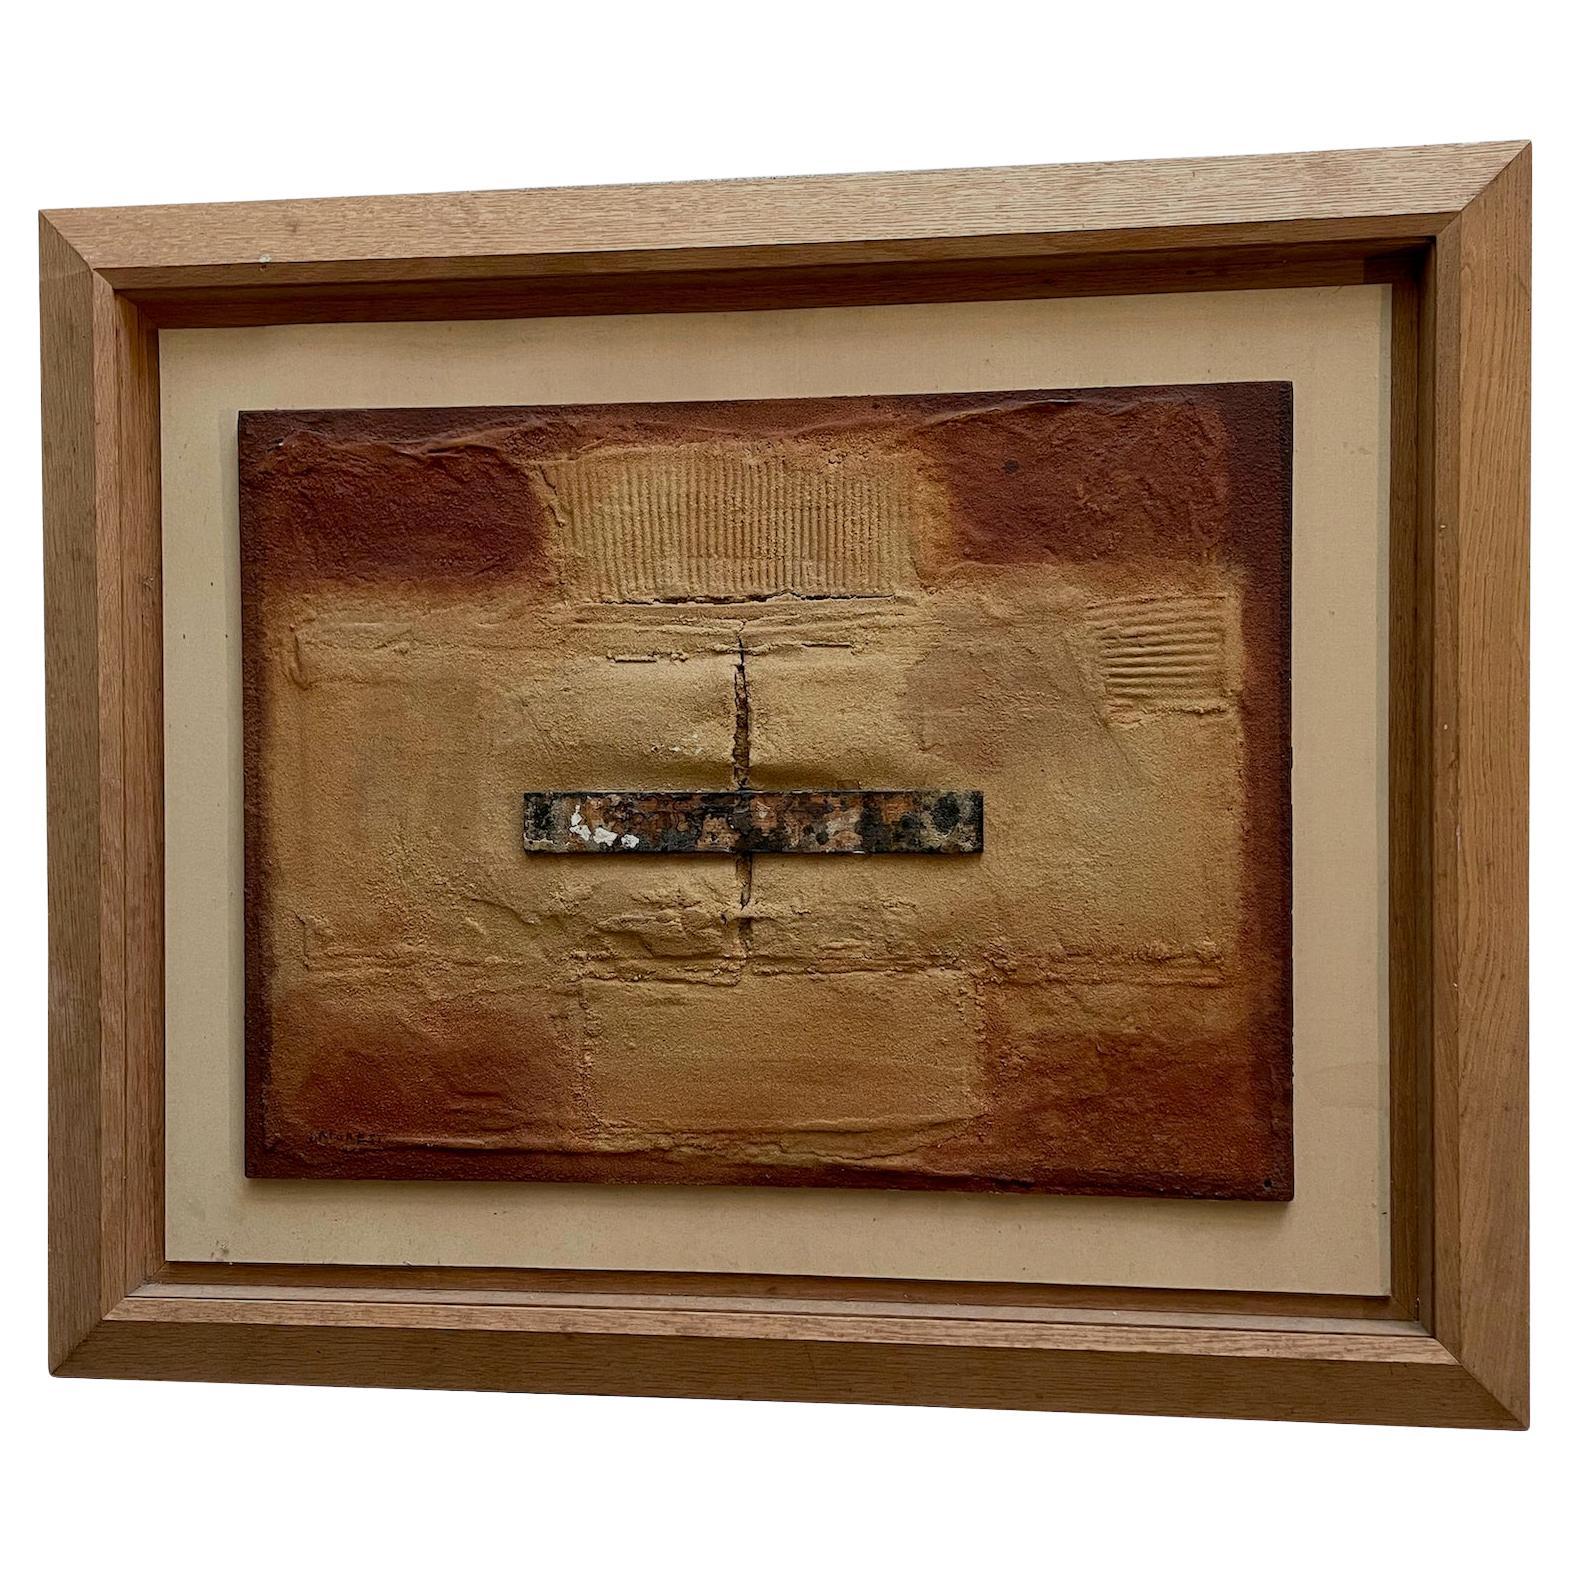 Terracotta And Beige Abstract Painting By Largrest, France, 1980s For Sale